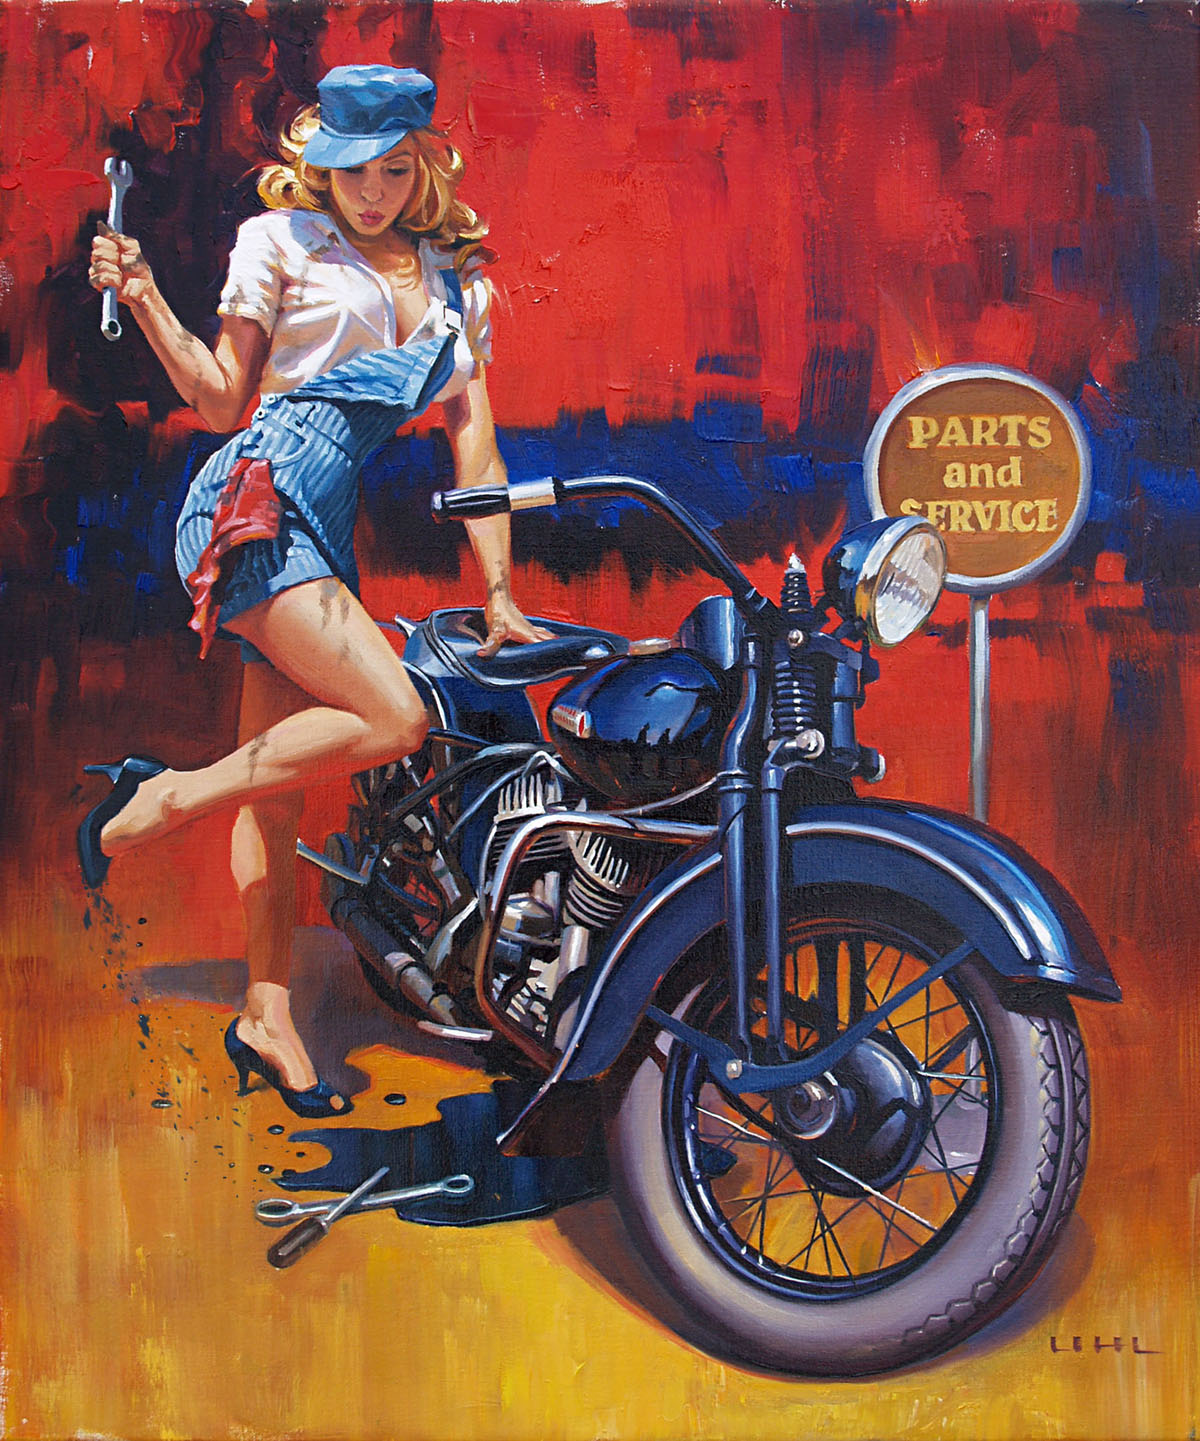 I was fortunate to be picked to pose for the most recent Uhl Studio - Harley Davidson series of 12 Collectable prints - this one is Sold Out! Check out the website - http://www.uhlstudios.com/ If you are a Sturgis fan you may have seen this on a billbo